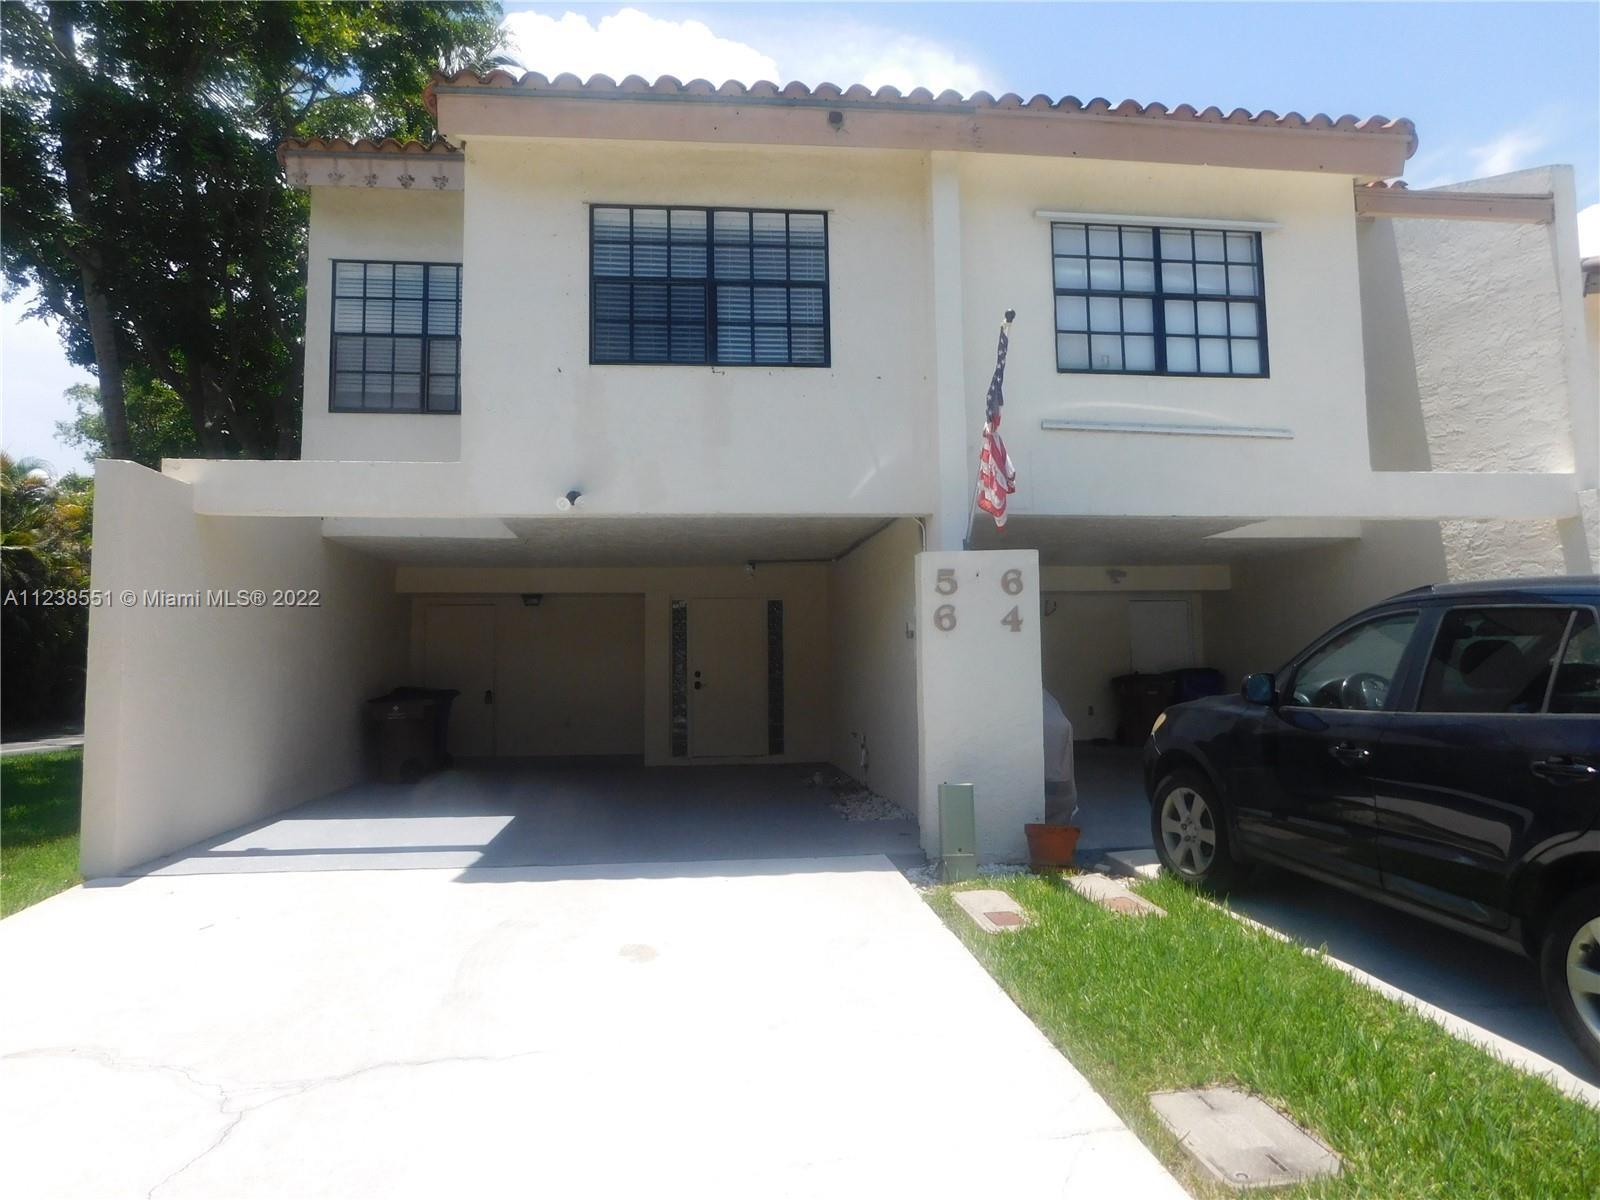 LARGE 3BED/2.5 BATH CORNER TOWNHOME IN DESIRABLE RIVERGLEN / COQUINA LAKES. FEATURES NEW PAINT, NEW 